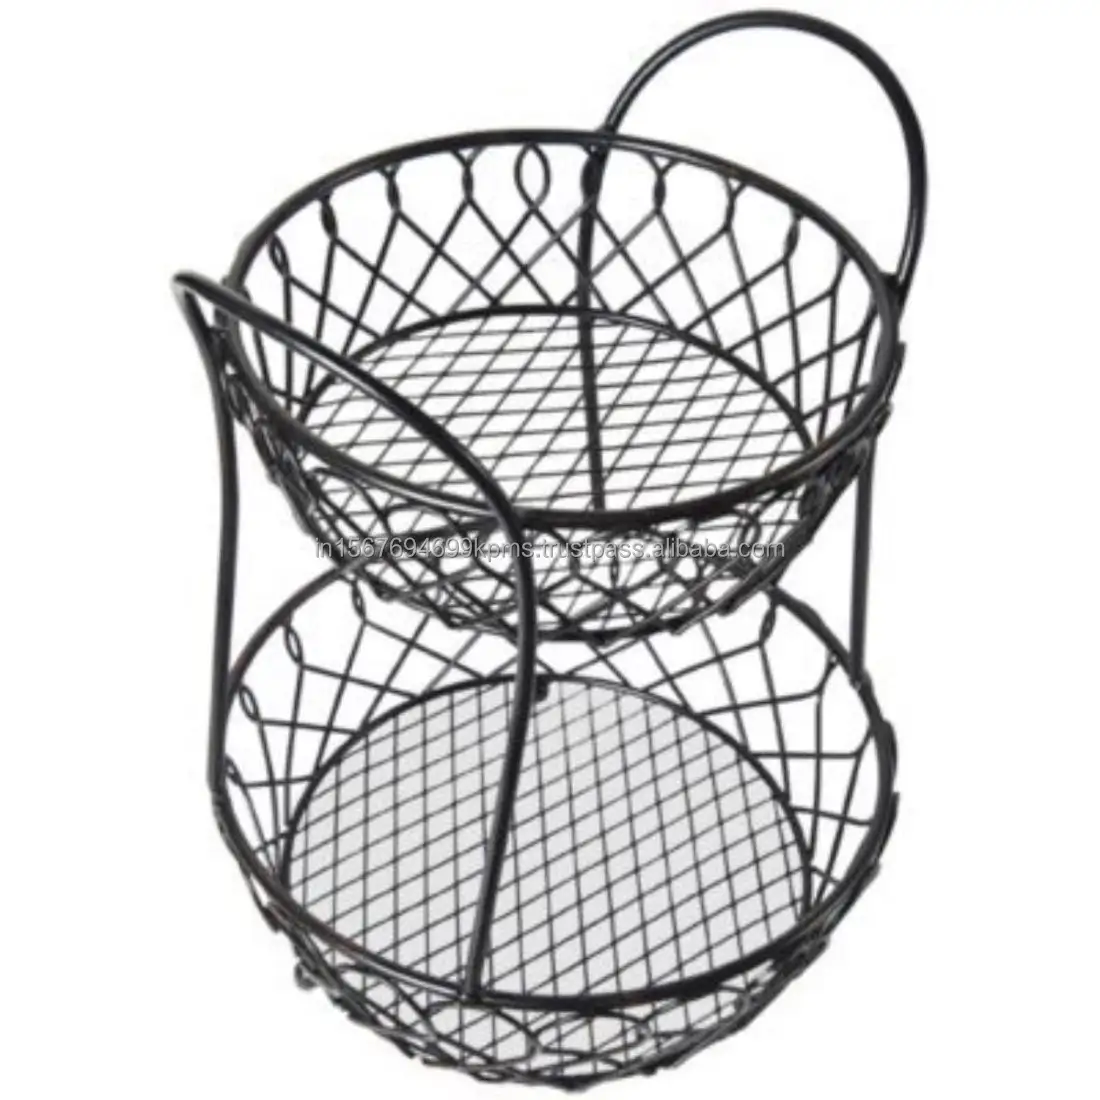 Kitchenware Display Large Wire Rack With Custom Packing Floor Storage Basket for Home Uses Kitchens Multifunctional Fruit Rack